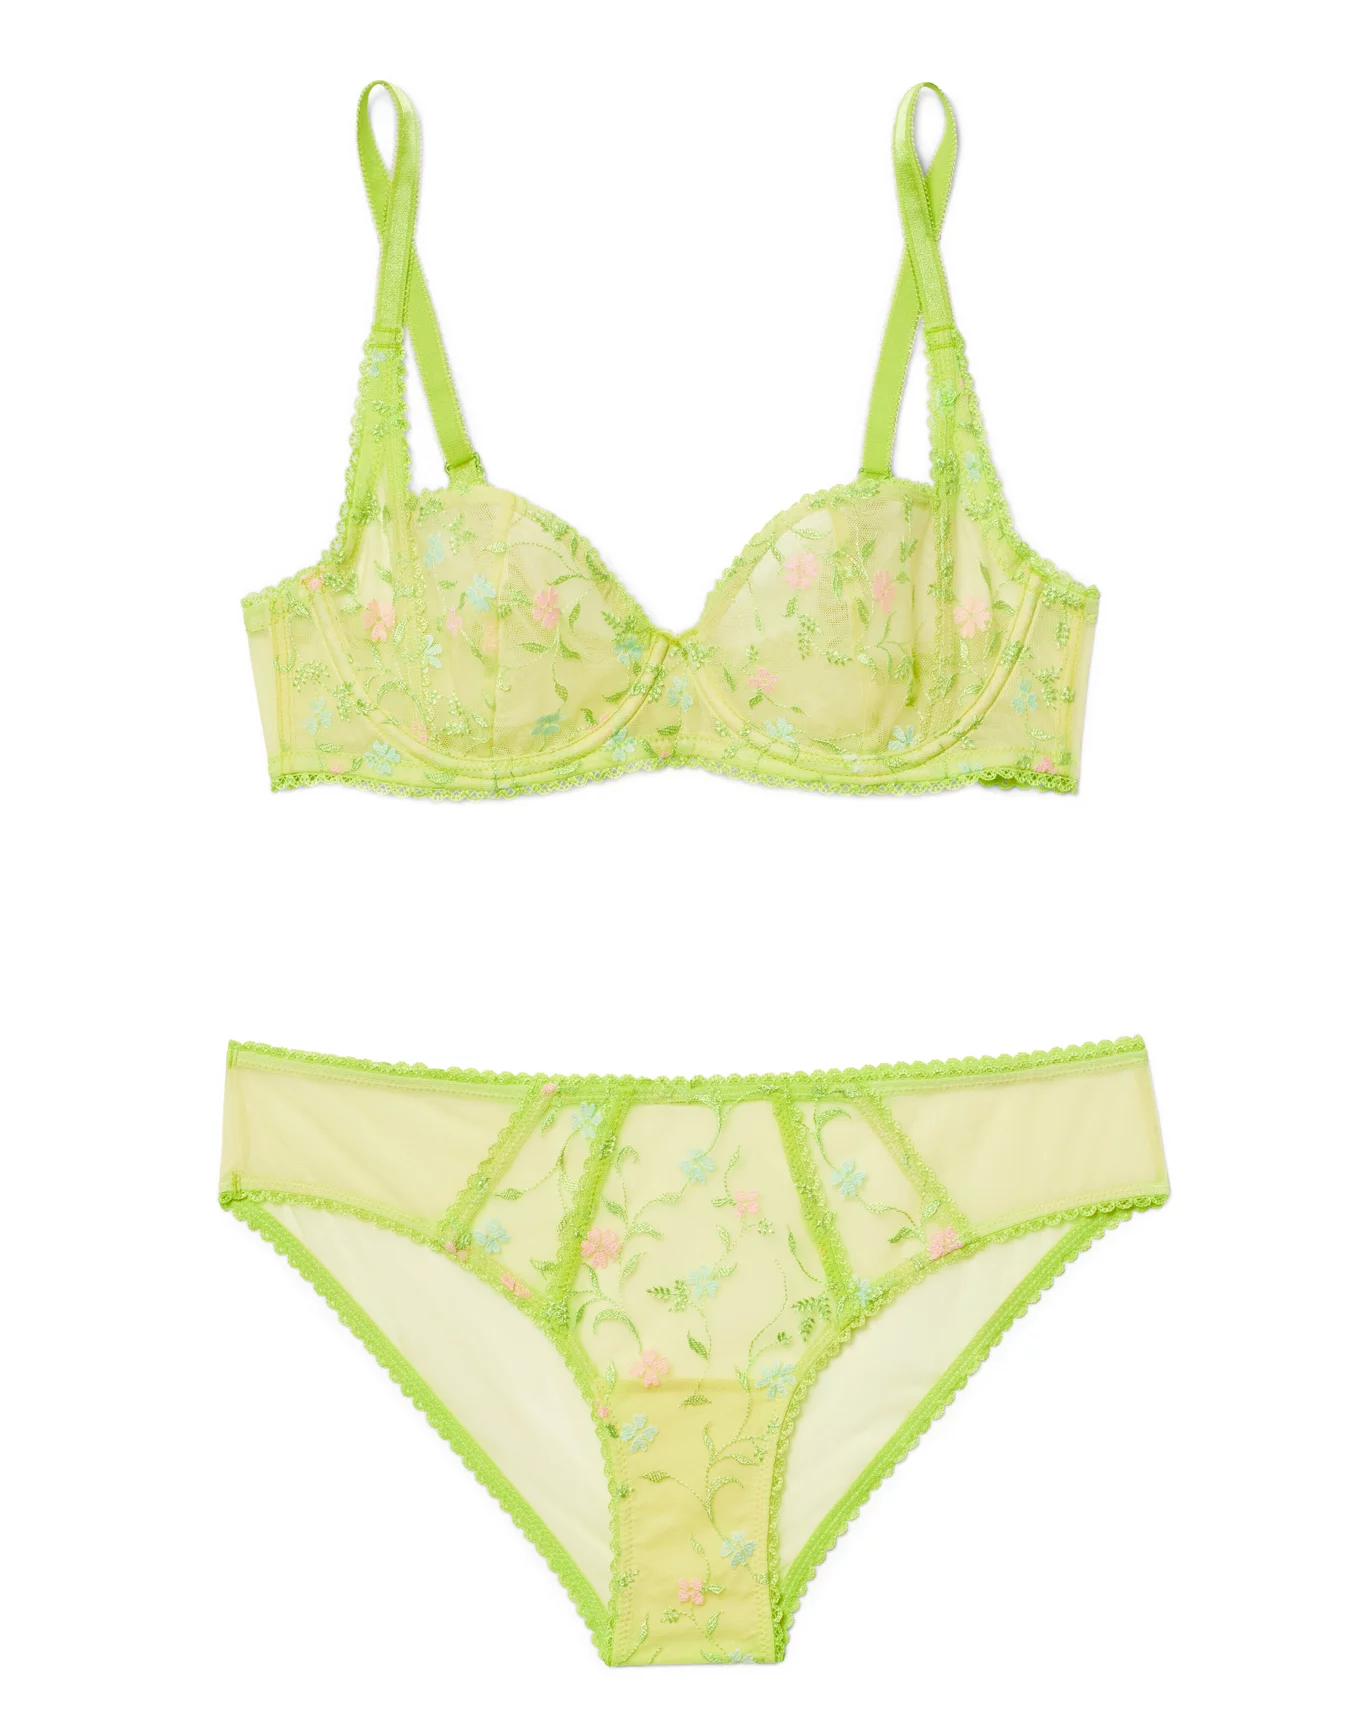 Rosa Floral Yellow Plus Unlined Balconette, 38DD-46DDD | Adore Me